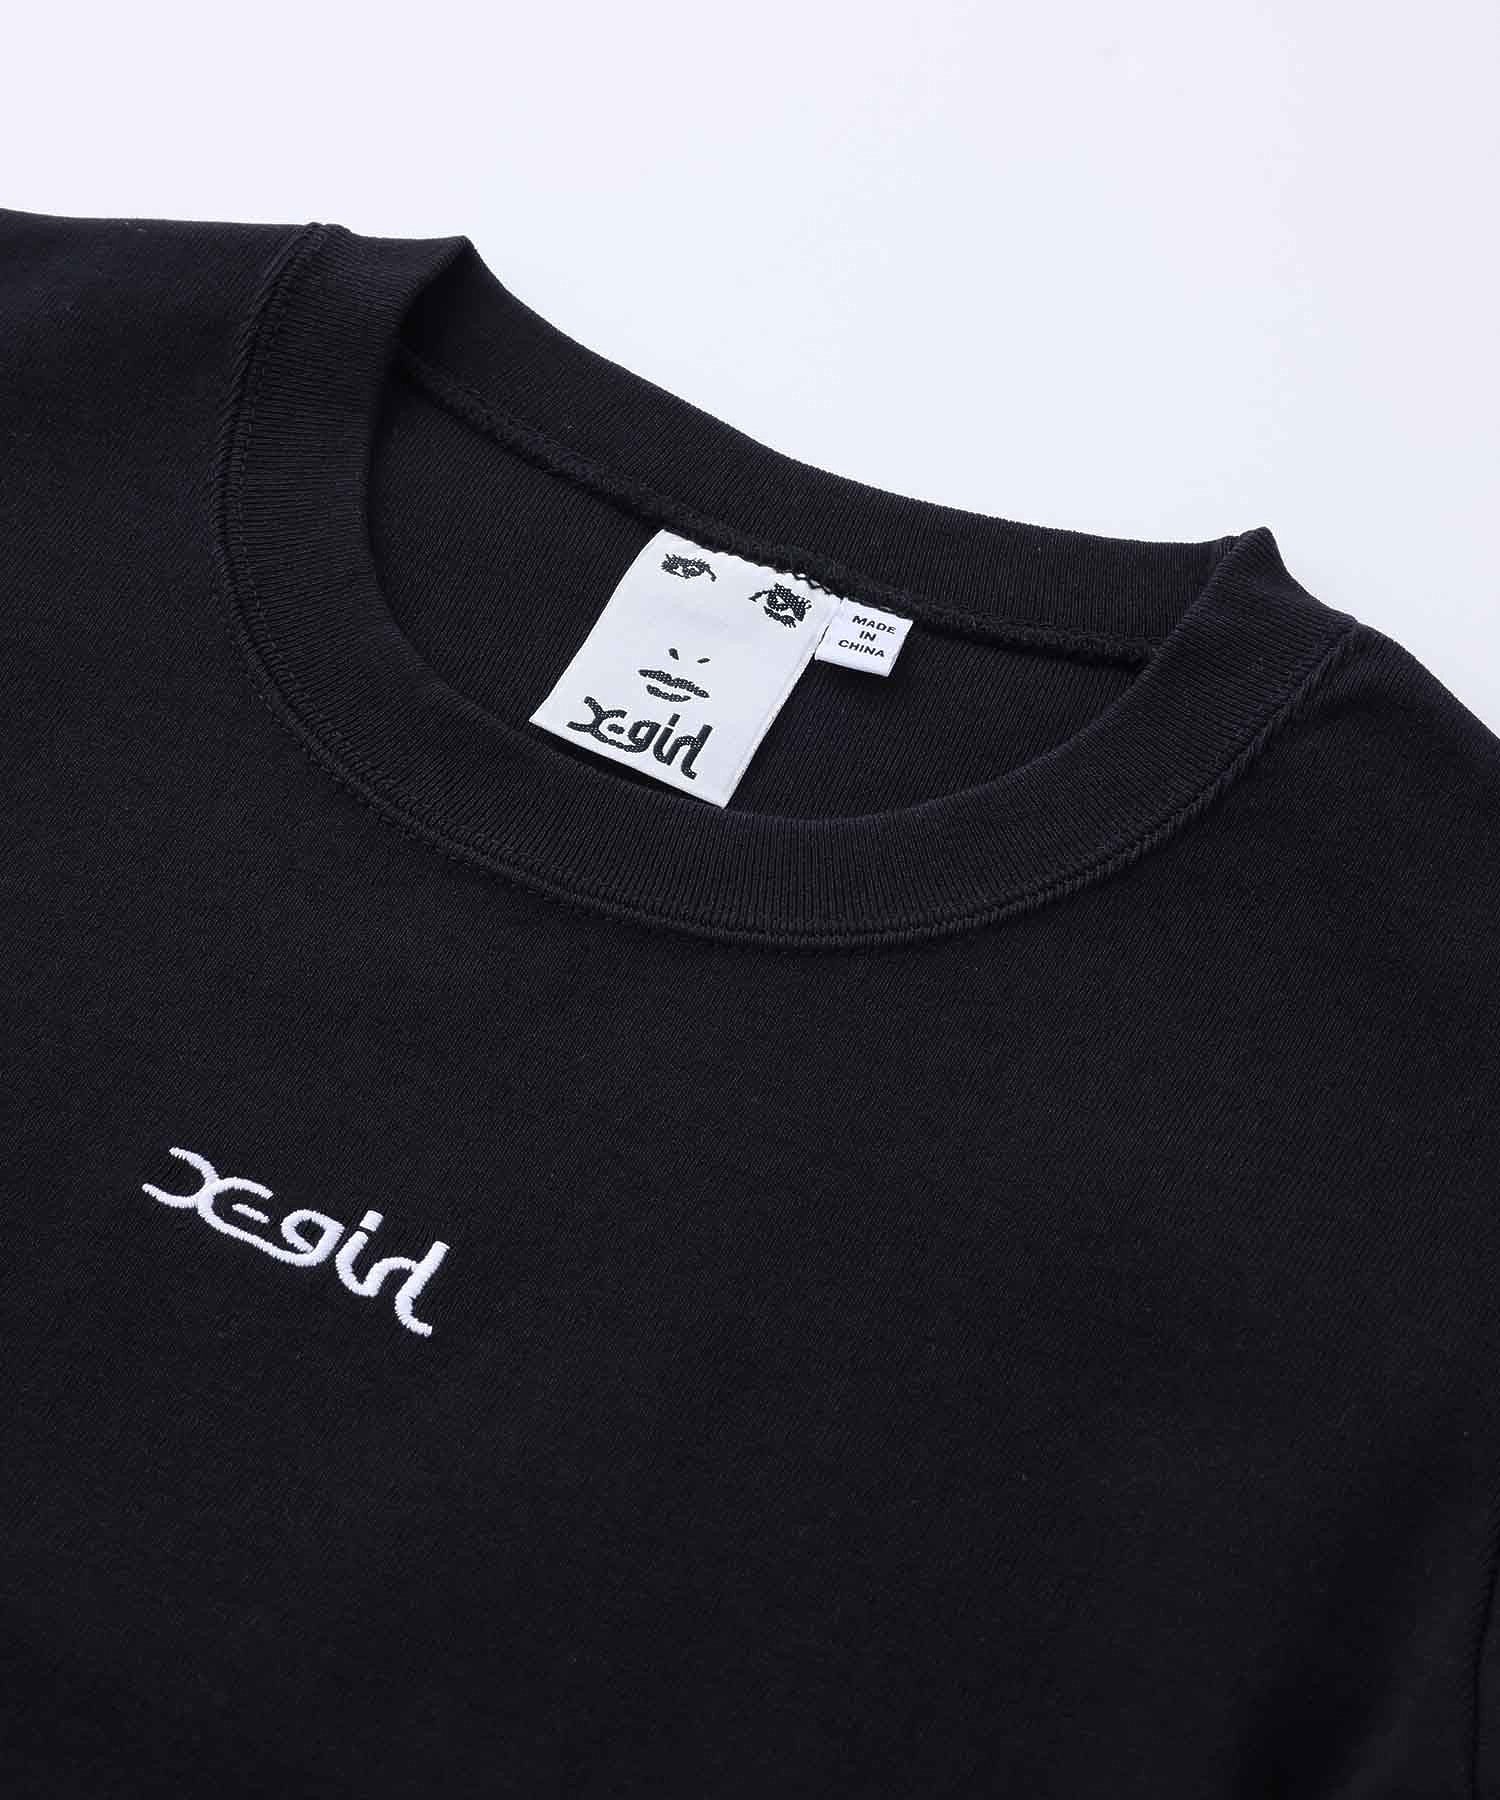 EMBROIDERED MILLS LOGO S/S BABY TEE X-girl